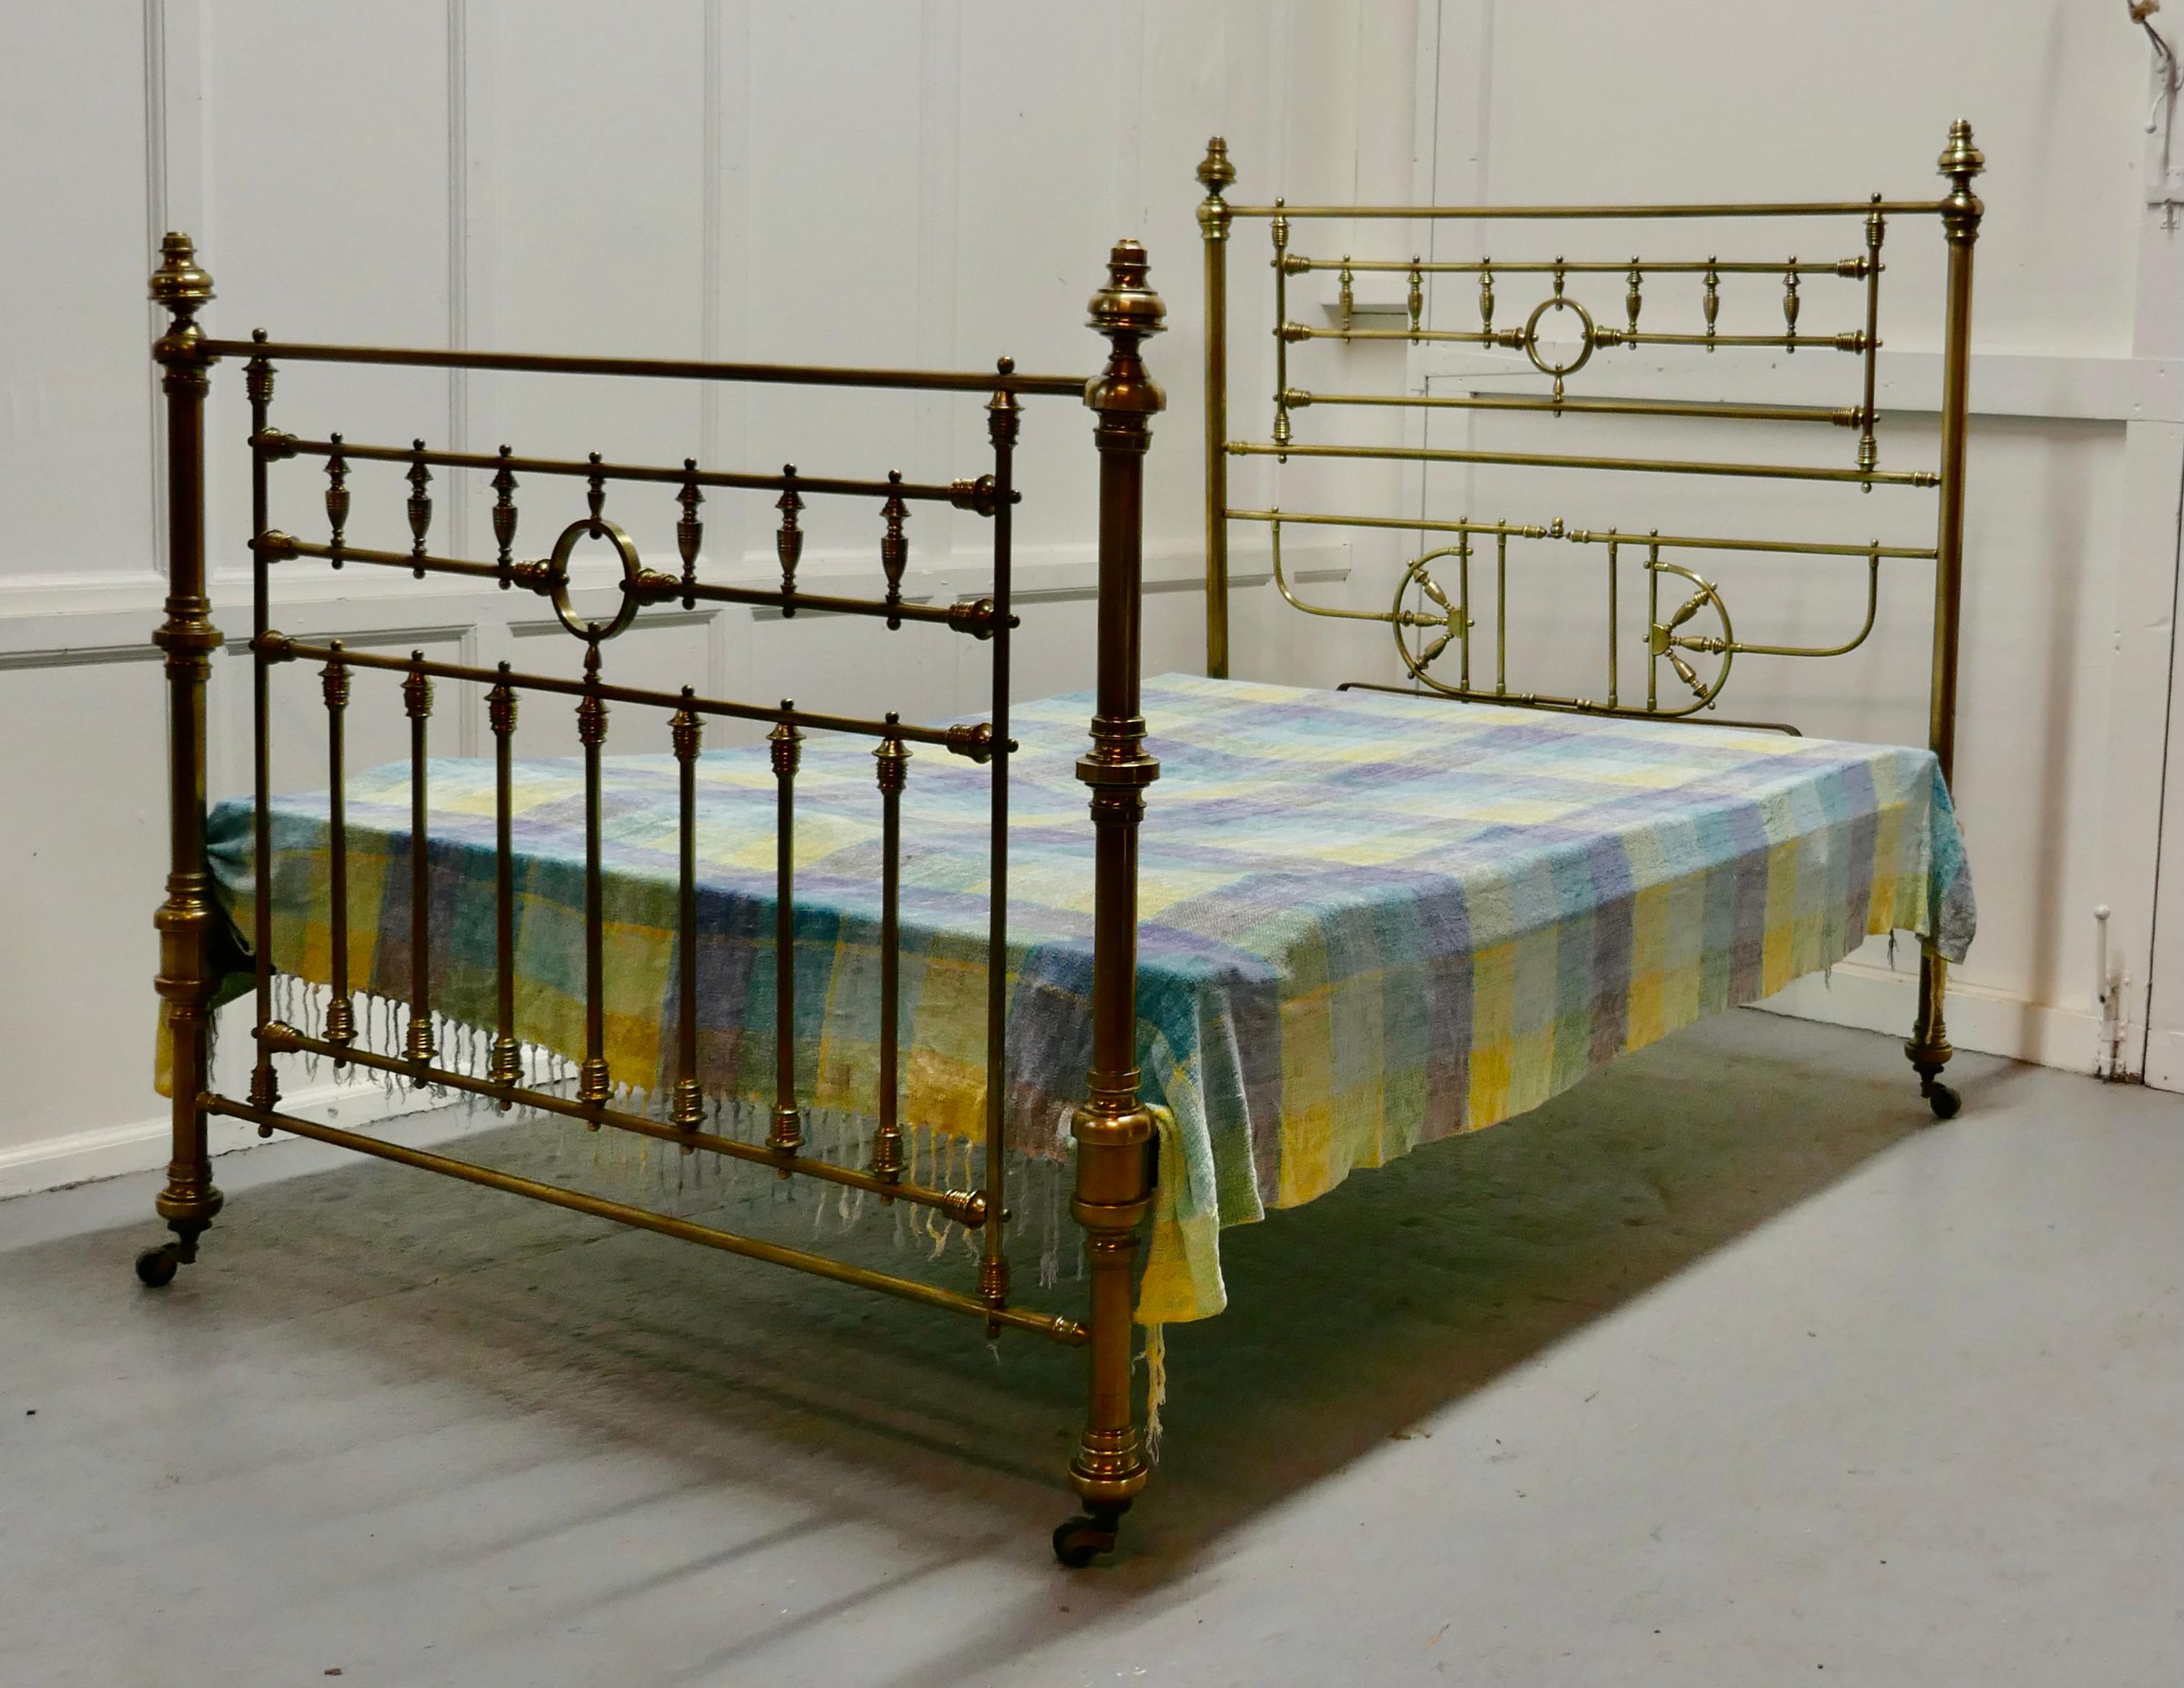 Superb 19th century Arts & Crafts brass bed, 4ft 6” double.

The bed dates from circa 1880, the head of the bed is decorative, it has turned brass spindles, matching similar decoration at the foot both ends have turned brass knobs and it stands on